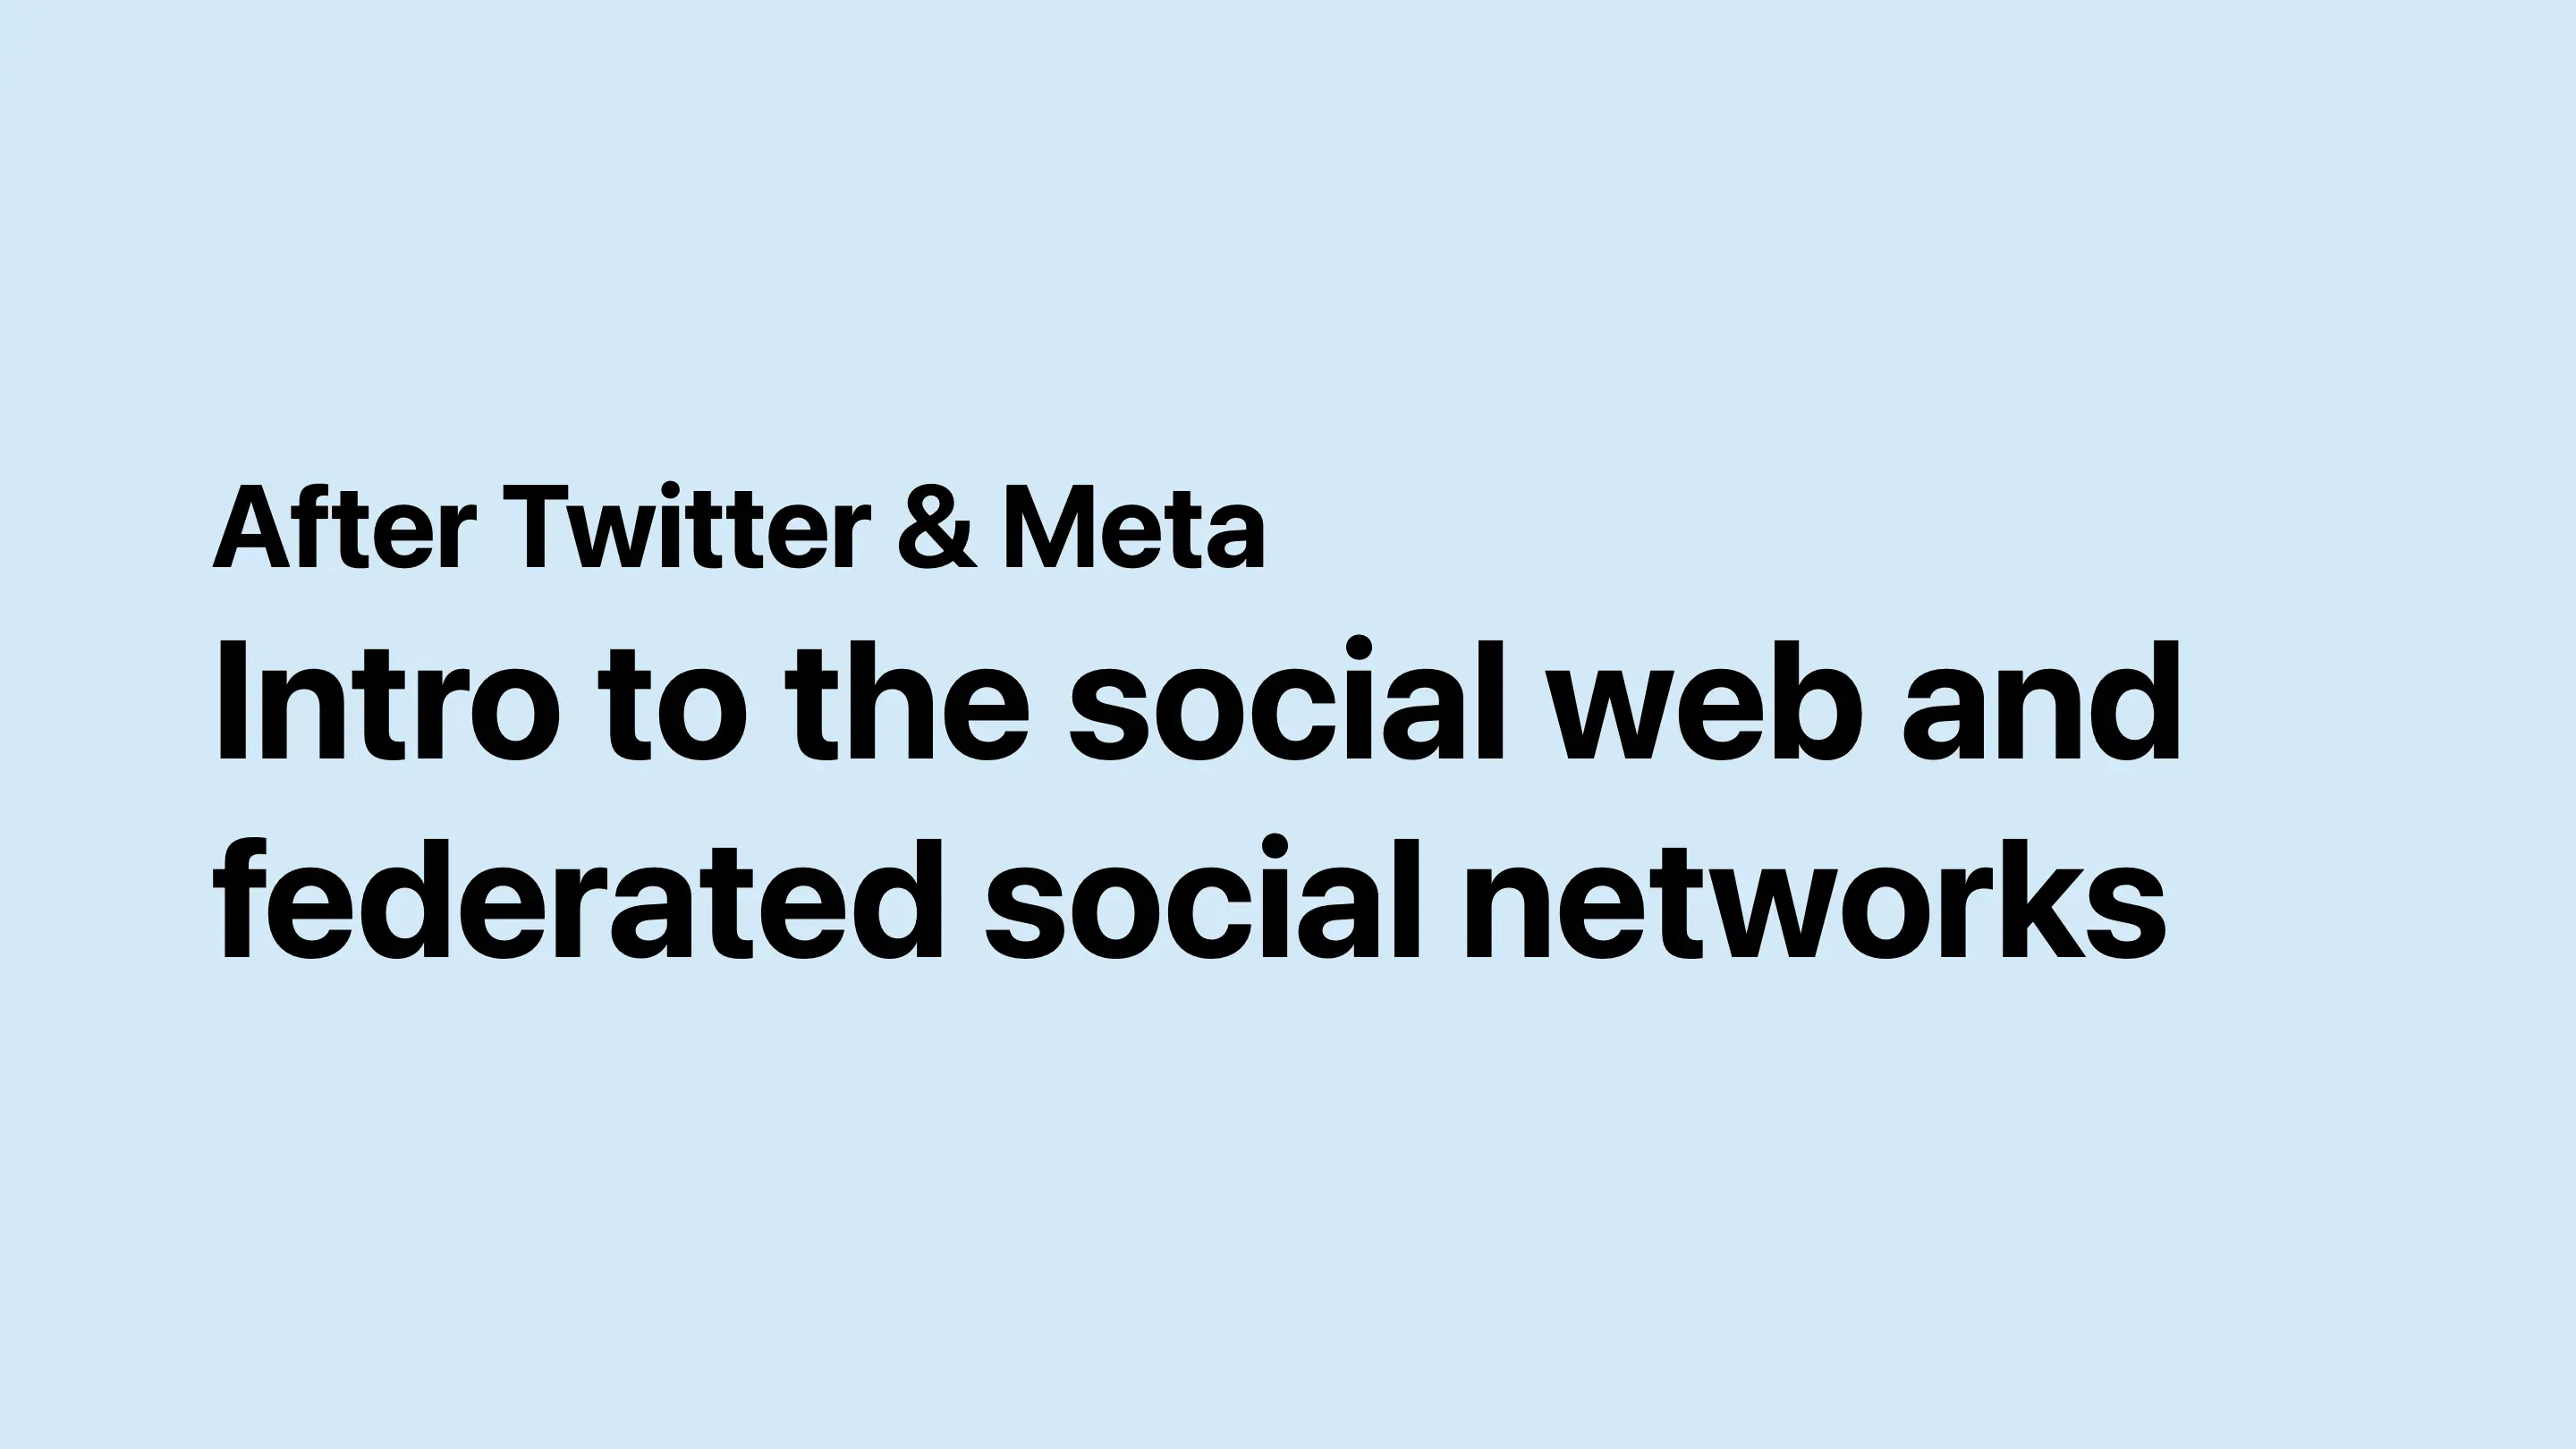 After Twitter & Meta. Intro to the social web and federated social networks